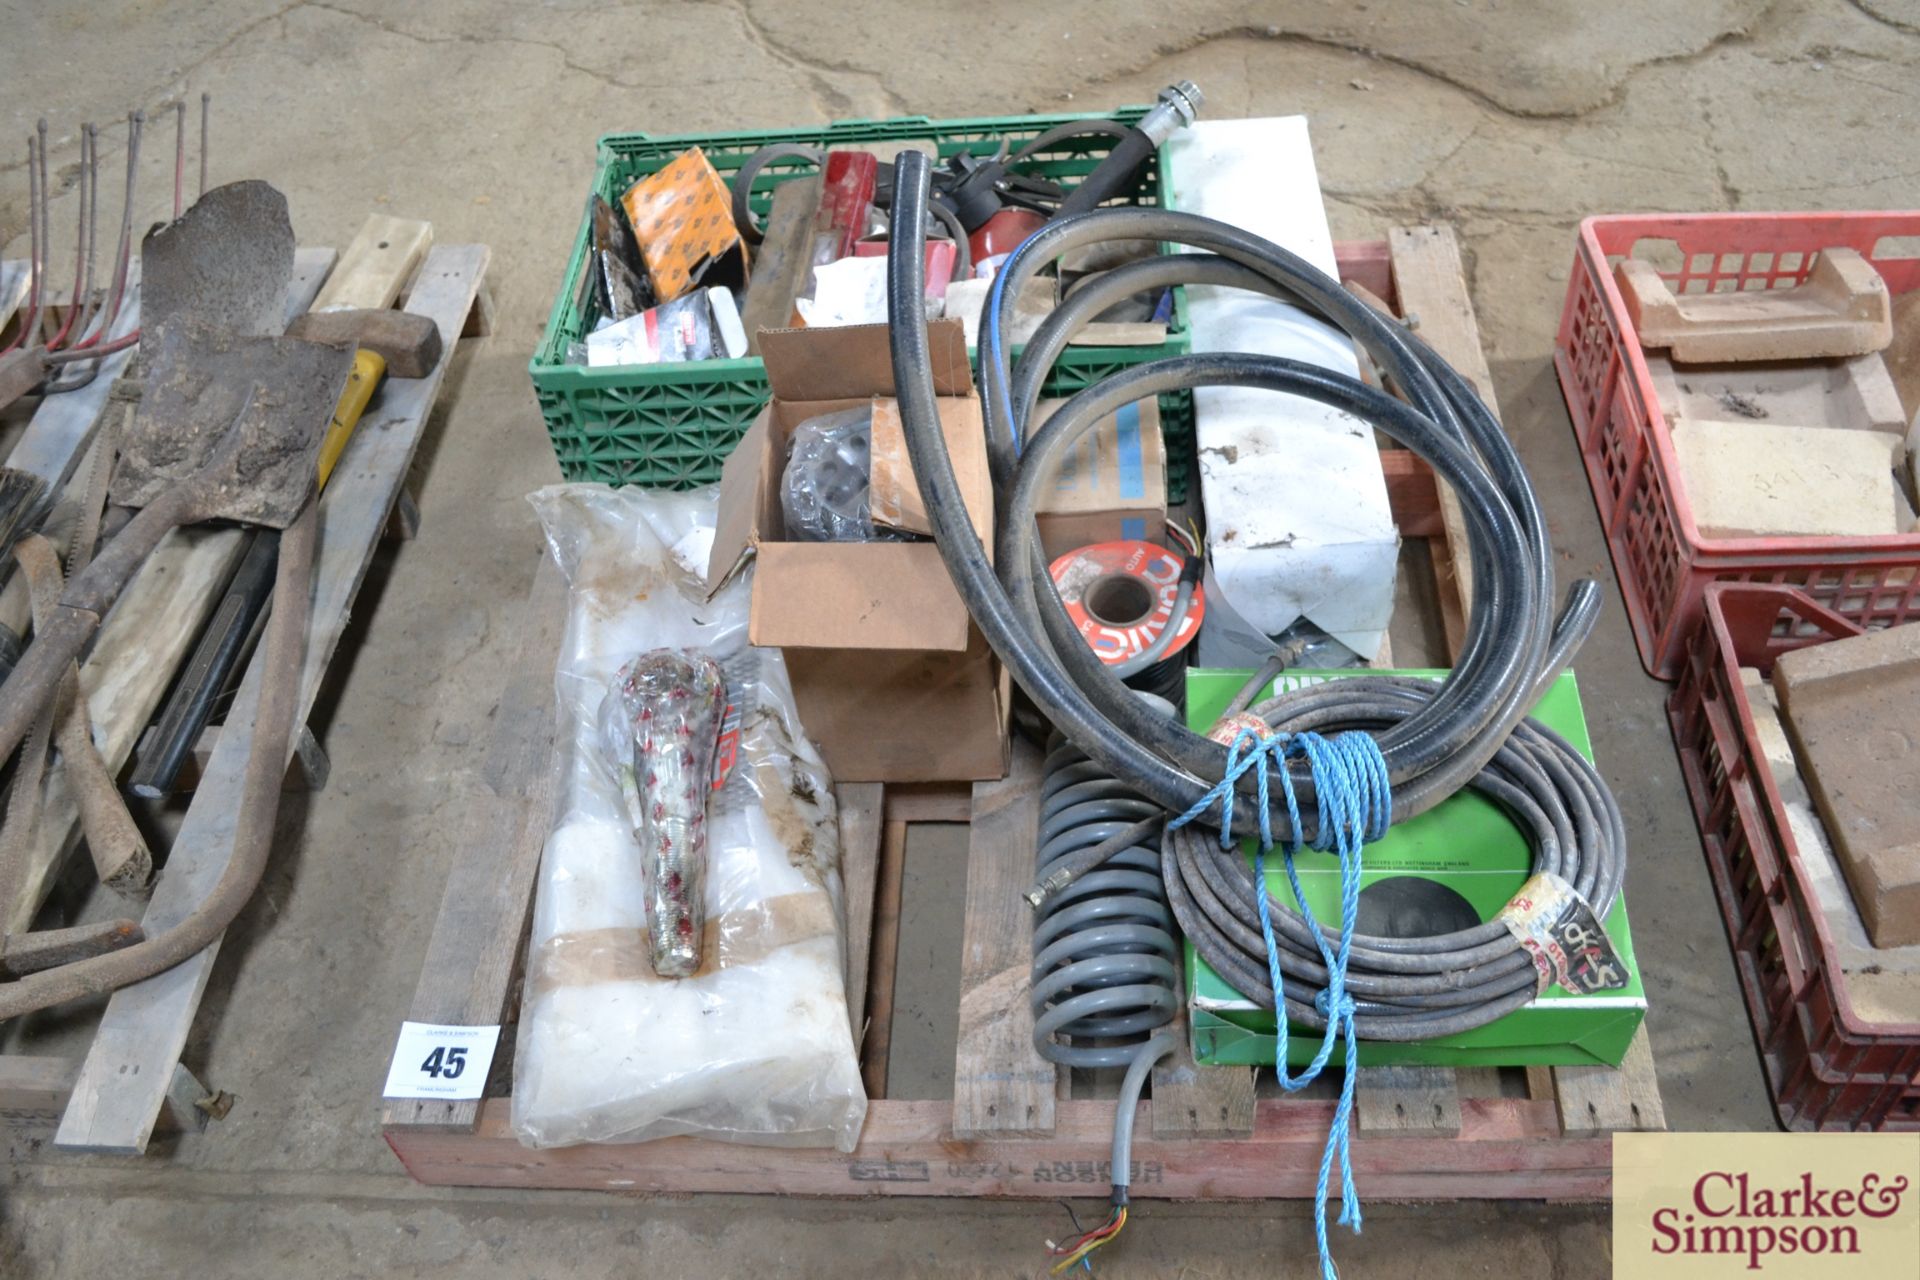 Pallet of various trailer and vehicle spares.